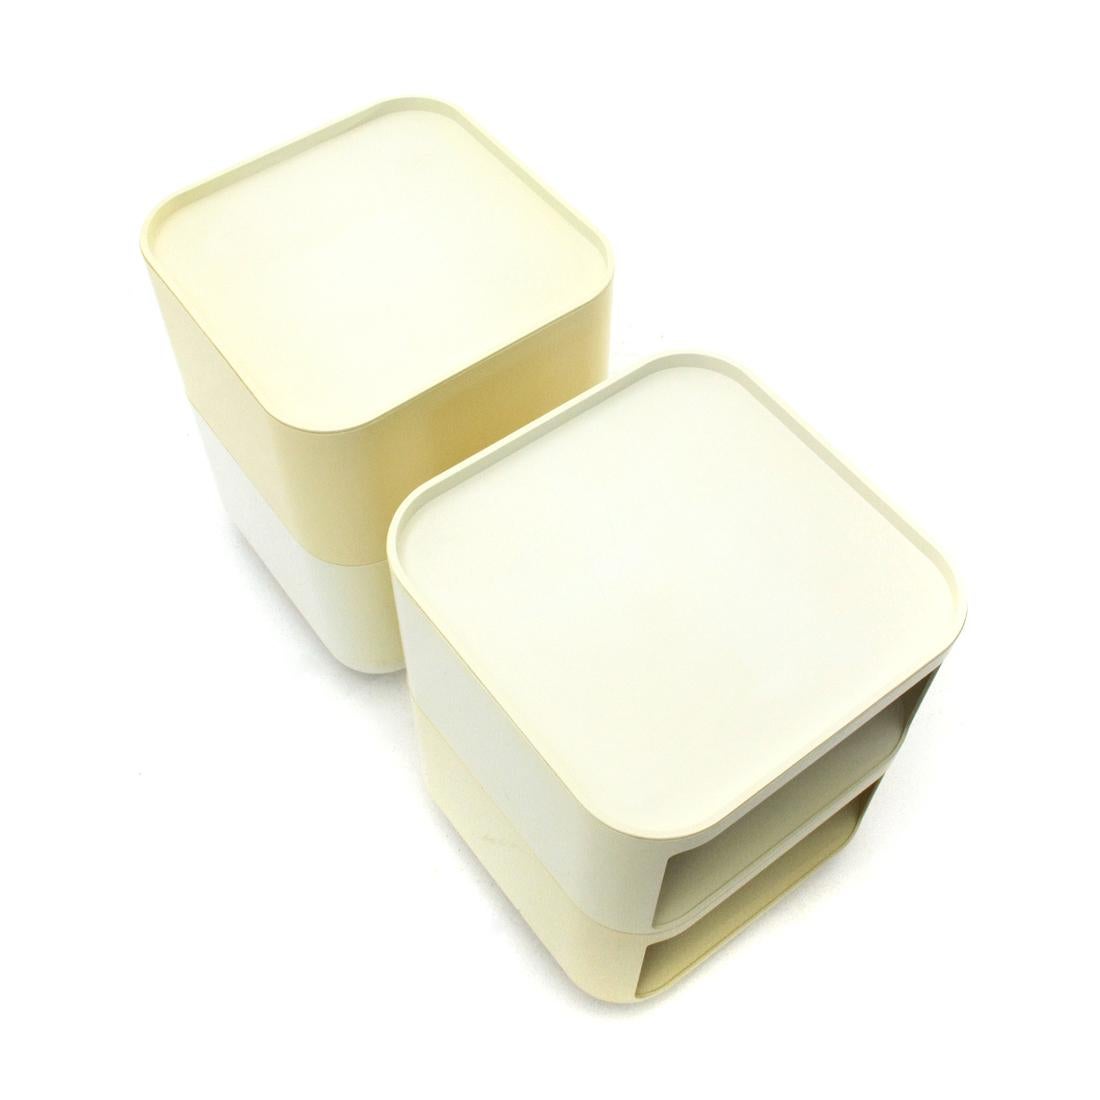 Pair of Square Componibili Containers by Anna Castelli Ferrieri for Kartell 1970 2